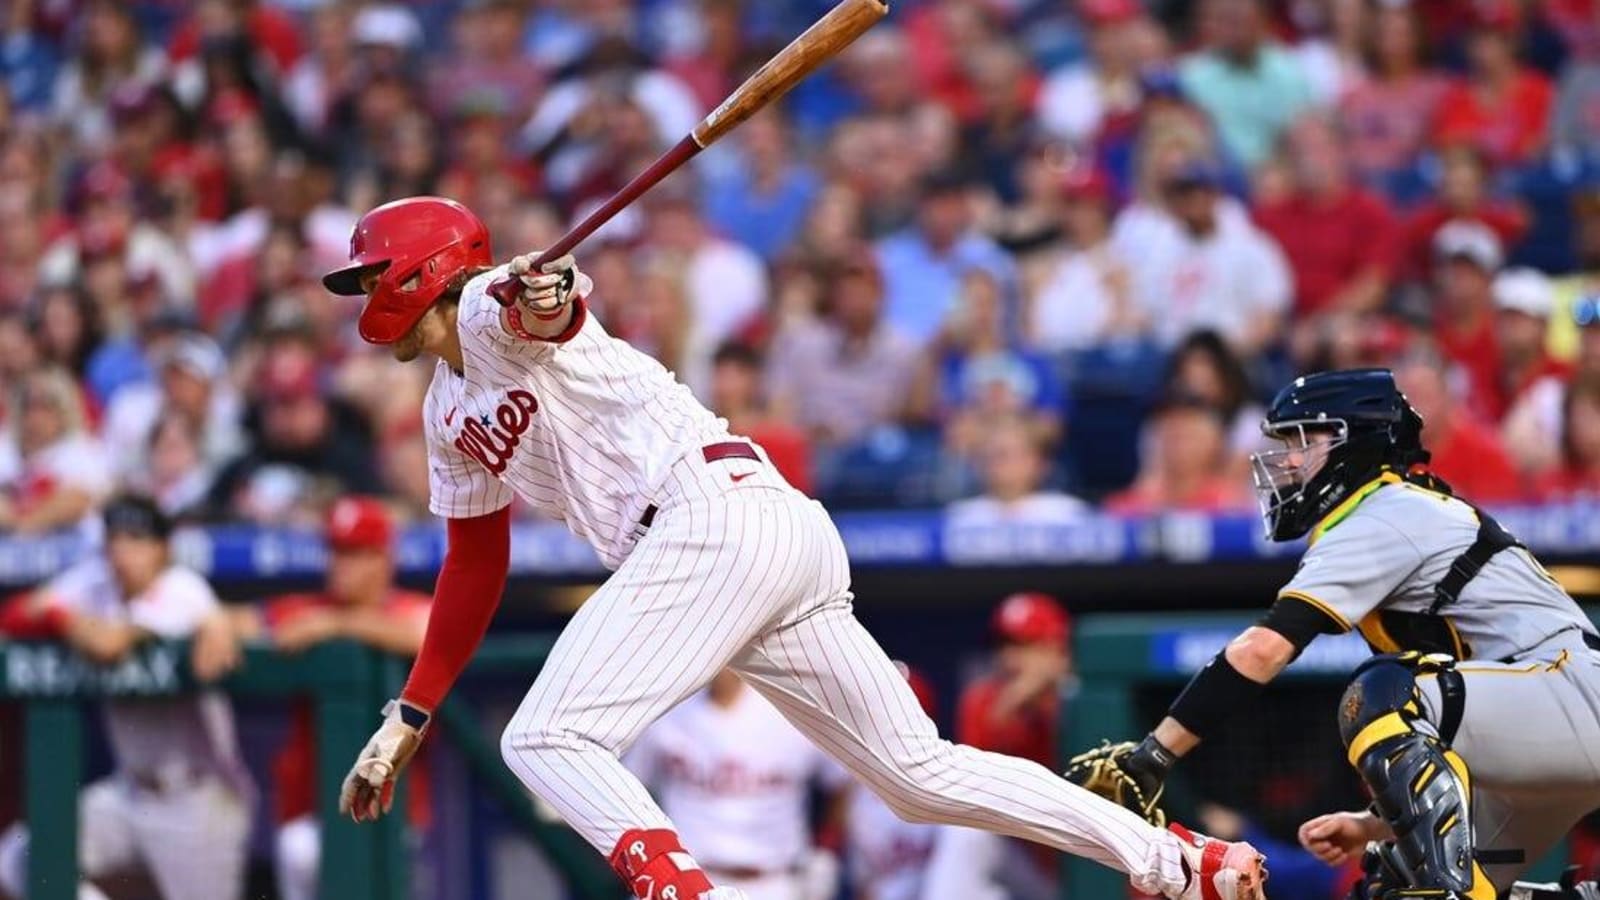 Bryce Harper, back from IL, drives in 2 as Phils top Pirates